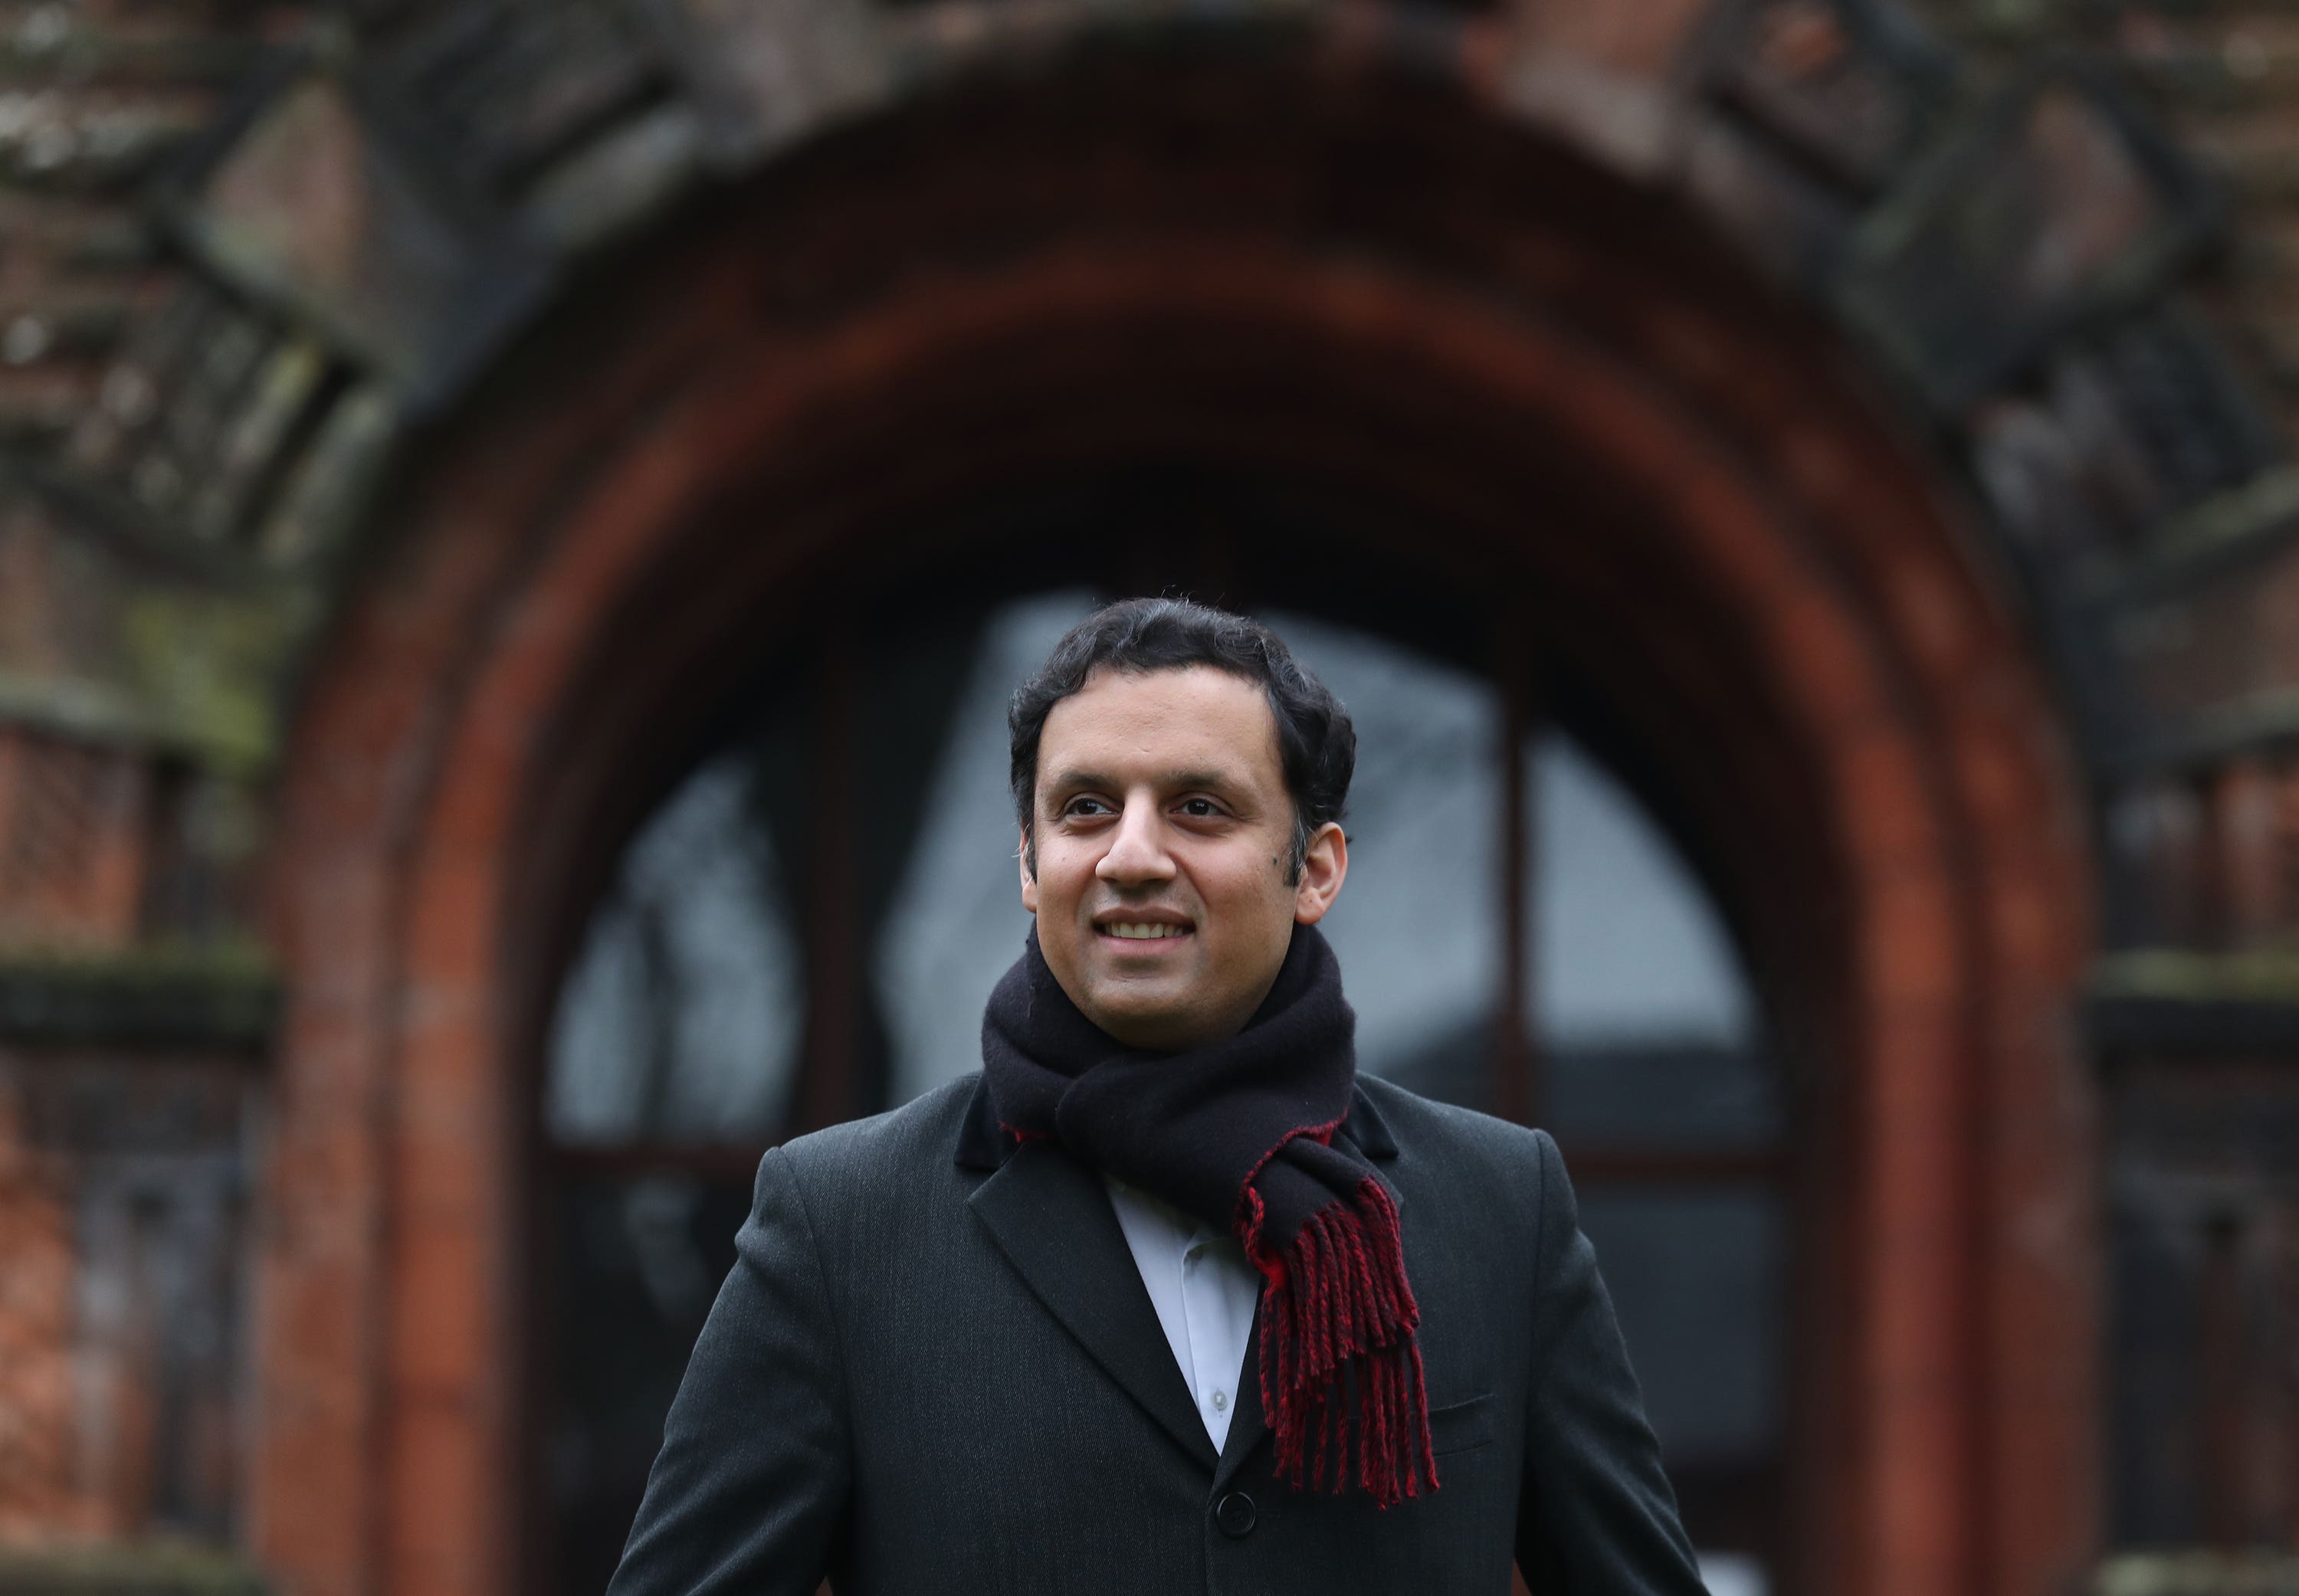 <em>Mr Sarwar won the leadership election on Saturday (Andrew Milligan/PA)</em>”/><cite class=cite>PA Wire</cite></div><figcaption aria-hidden=true><em>Mr Sarwar won the leadership election on Saturday (Andrew Milligan/PA)</em> <cite class=hidden>PA Wire</cite></figcaption></figure><p>“They are both a credit to their party.</p><p>“Liberal Democrats have long championed a federal future for the United Kingdom and in recent times there has been an increased recognition from Gordon Brown and others that the governing architecture that underpins the United Kingdom needs reform.</p><p>“I am keen to work with Anas and his party to make reform of the UK a reality. </p><p>“It is time to fix the foundations on which our house of nations sits.”</p><p>Speaking after his election, Sarwar expressed his desire to change the party, saying “you haven’t had the Scottish Labour Party you deserve”.</p><p>He added: “With rising injustice, inequality and division, I’m sorry we haven’t been good enough.</p><p>“And I will work day and night to change that, so we can build the country we all need.”</p><p>Meanwhile, the Scottish Greens said Sarwar will immediately be thrust into the centre of a constitutional wrangle.</p><p>Sarwar has previously said pro-independence parties should put their views aside and focus on the recovery from the pandemic.</p><p>But Greens co-leader Patrick Harvie said: “I welcome Anas Sarwar to his new role, but he faces a divided party.</p><p>“Anas has been clear that Scottish Labour would stand in the way of Scots having a say over their future, but this will not play well with around a third of Labour voters who now say they would back independence.”</p><p>SNP depute leader Keith Brown also said Mr Sarwar would have a tough time in his new role.</p><p>“Mr Sarwar has, perhaps, an impossible job on his hands breathing life into a party with no new ideas, ambition or vision for Scotland,” he said.</p><p>Mr Brown added: “For as long as Labour’s dismissive attitude towards independence, and towards Scotland’s right to decide its own future, continues, they have no chance of rejuvenating a party which has already lost nearly all credibility in the eyes of the Scottish people.”</p><div class=